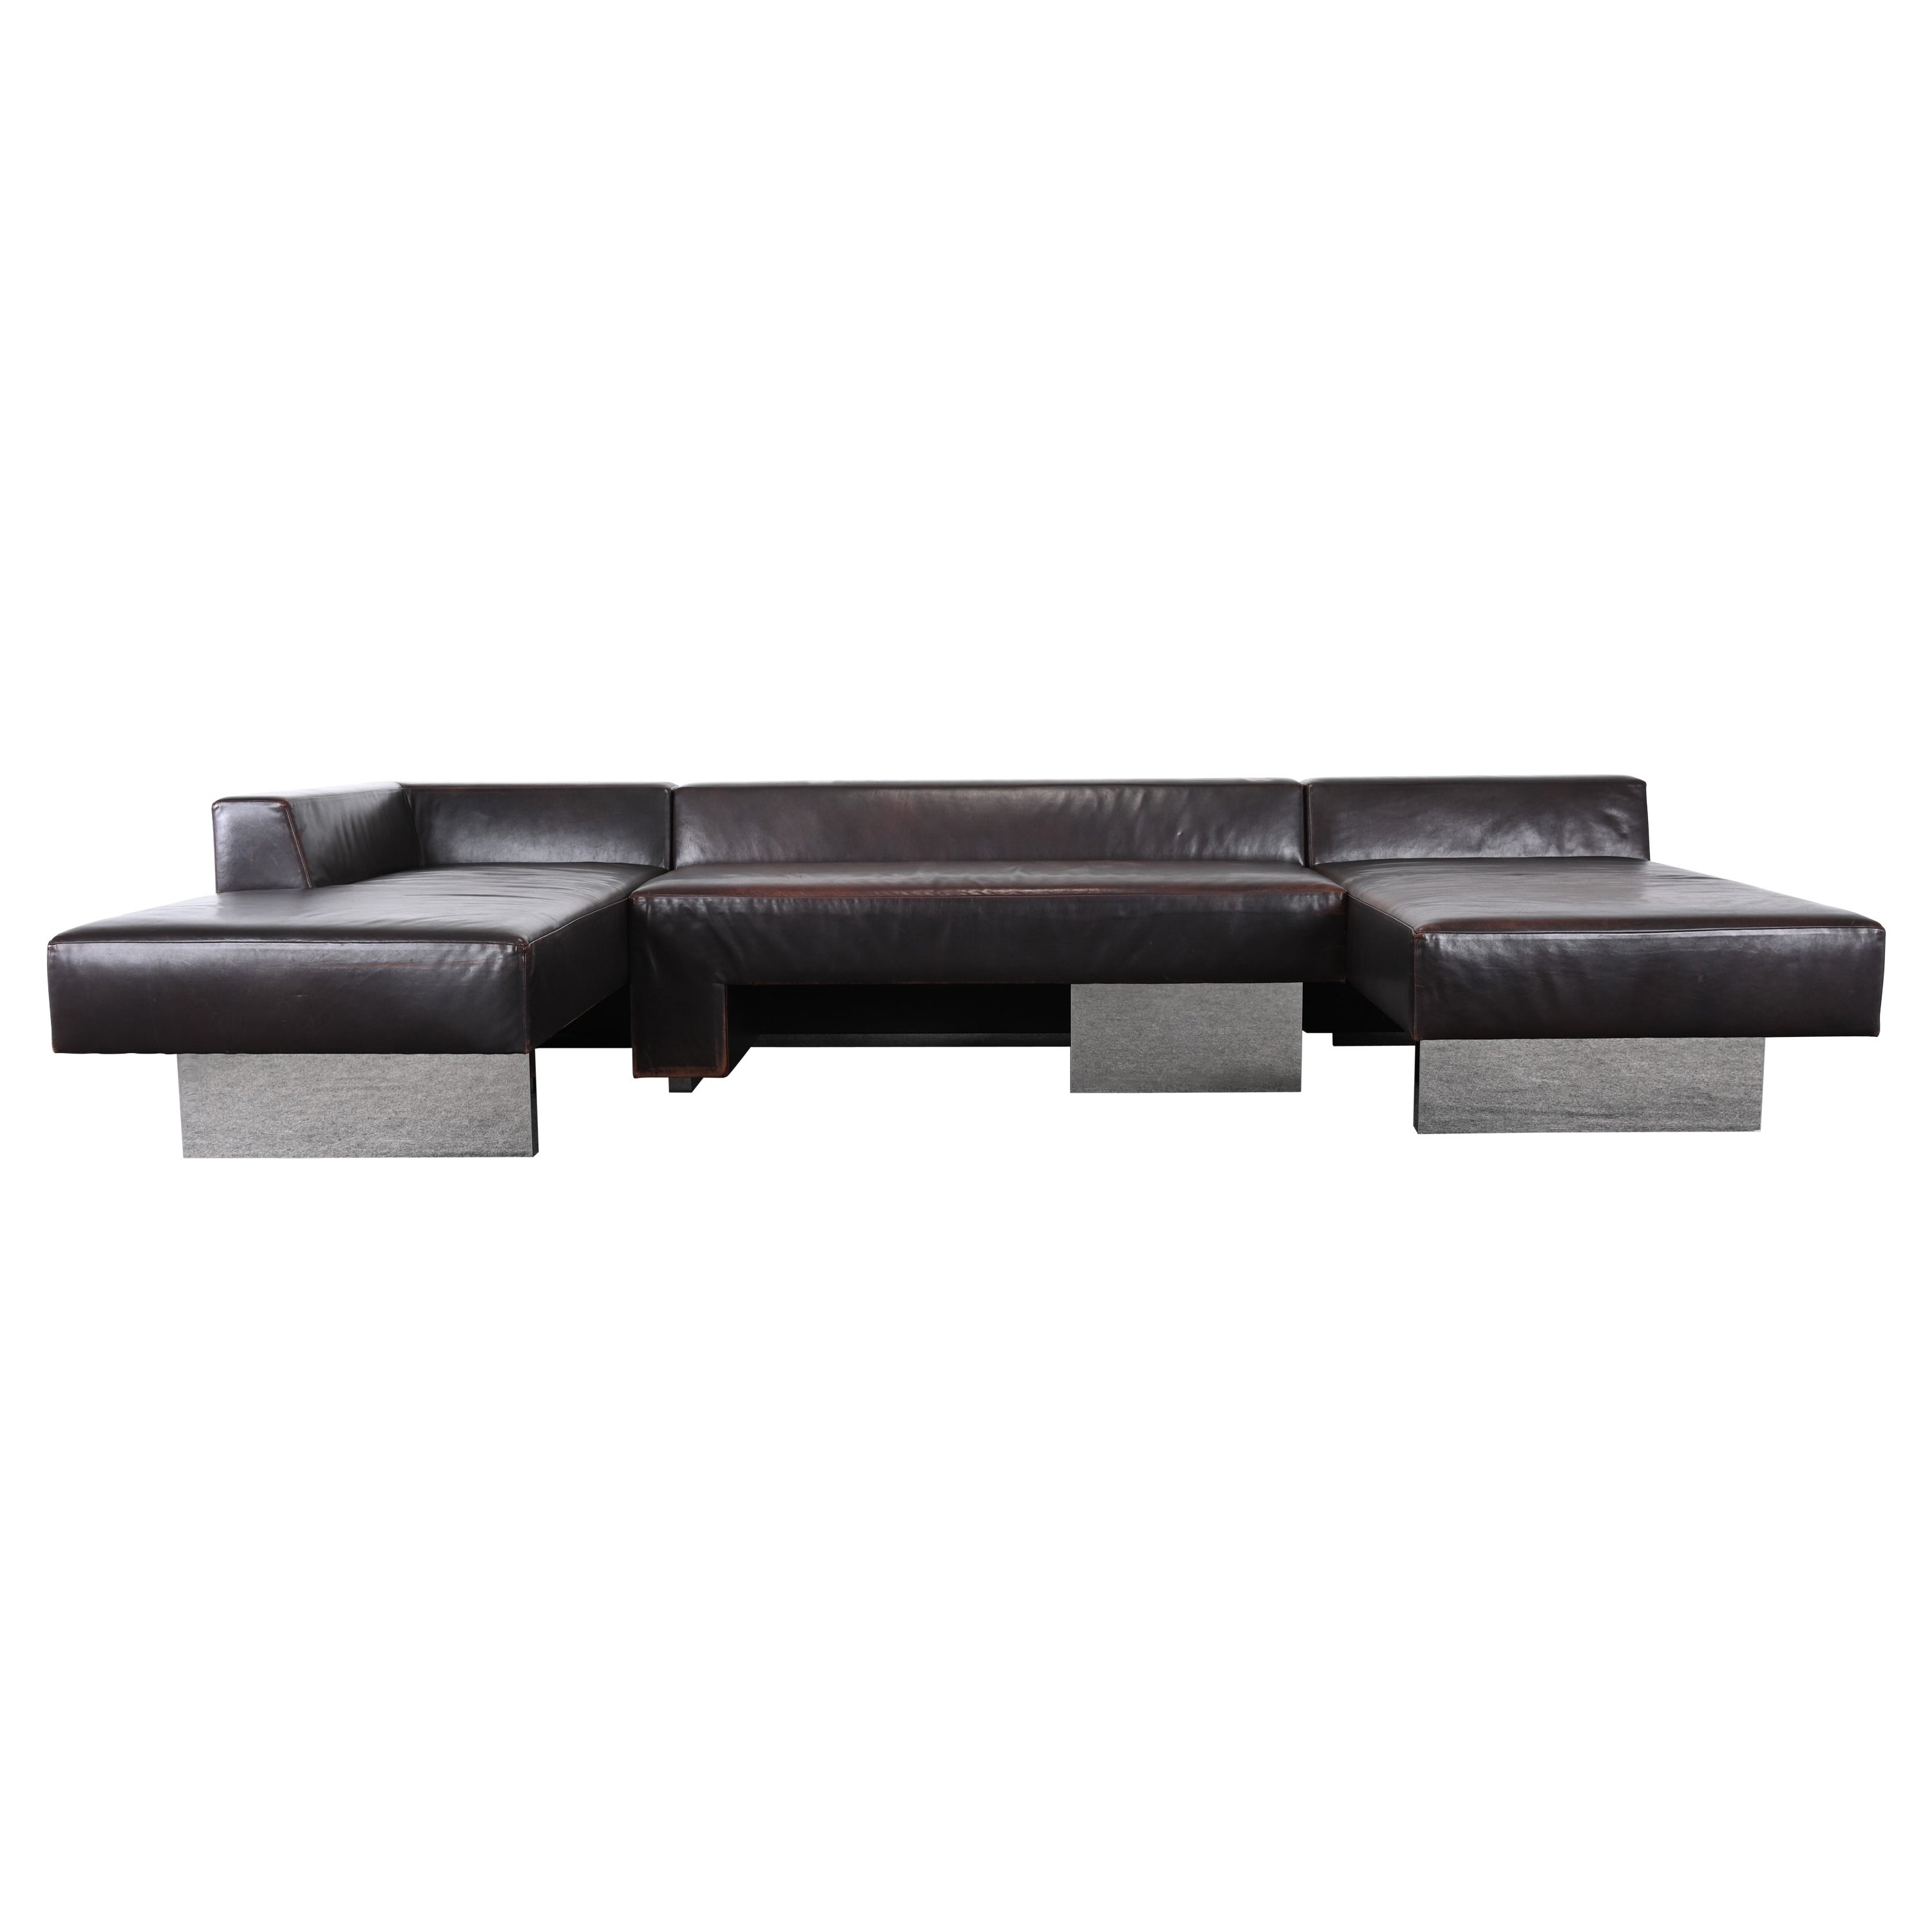 Sectional Sofa and Leather and Steel Bench by Vladimir Kagan for Gucci, 1990s